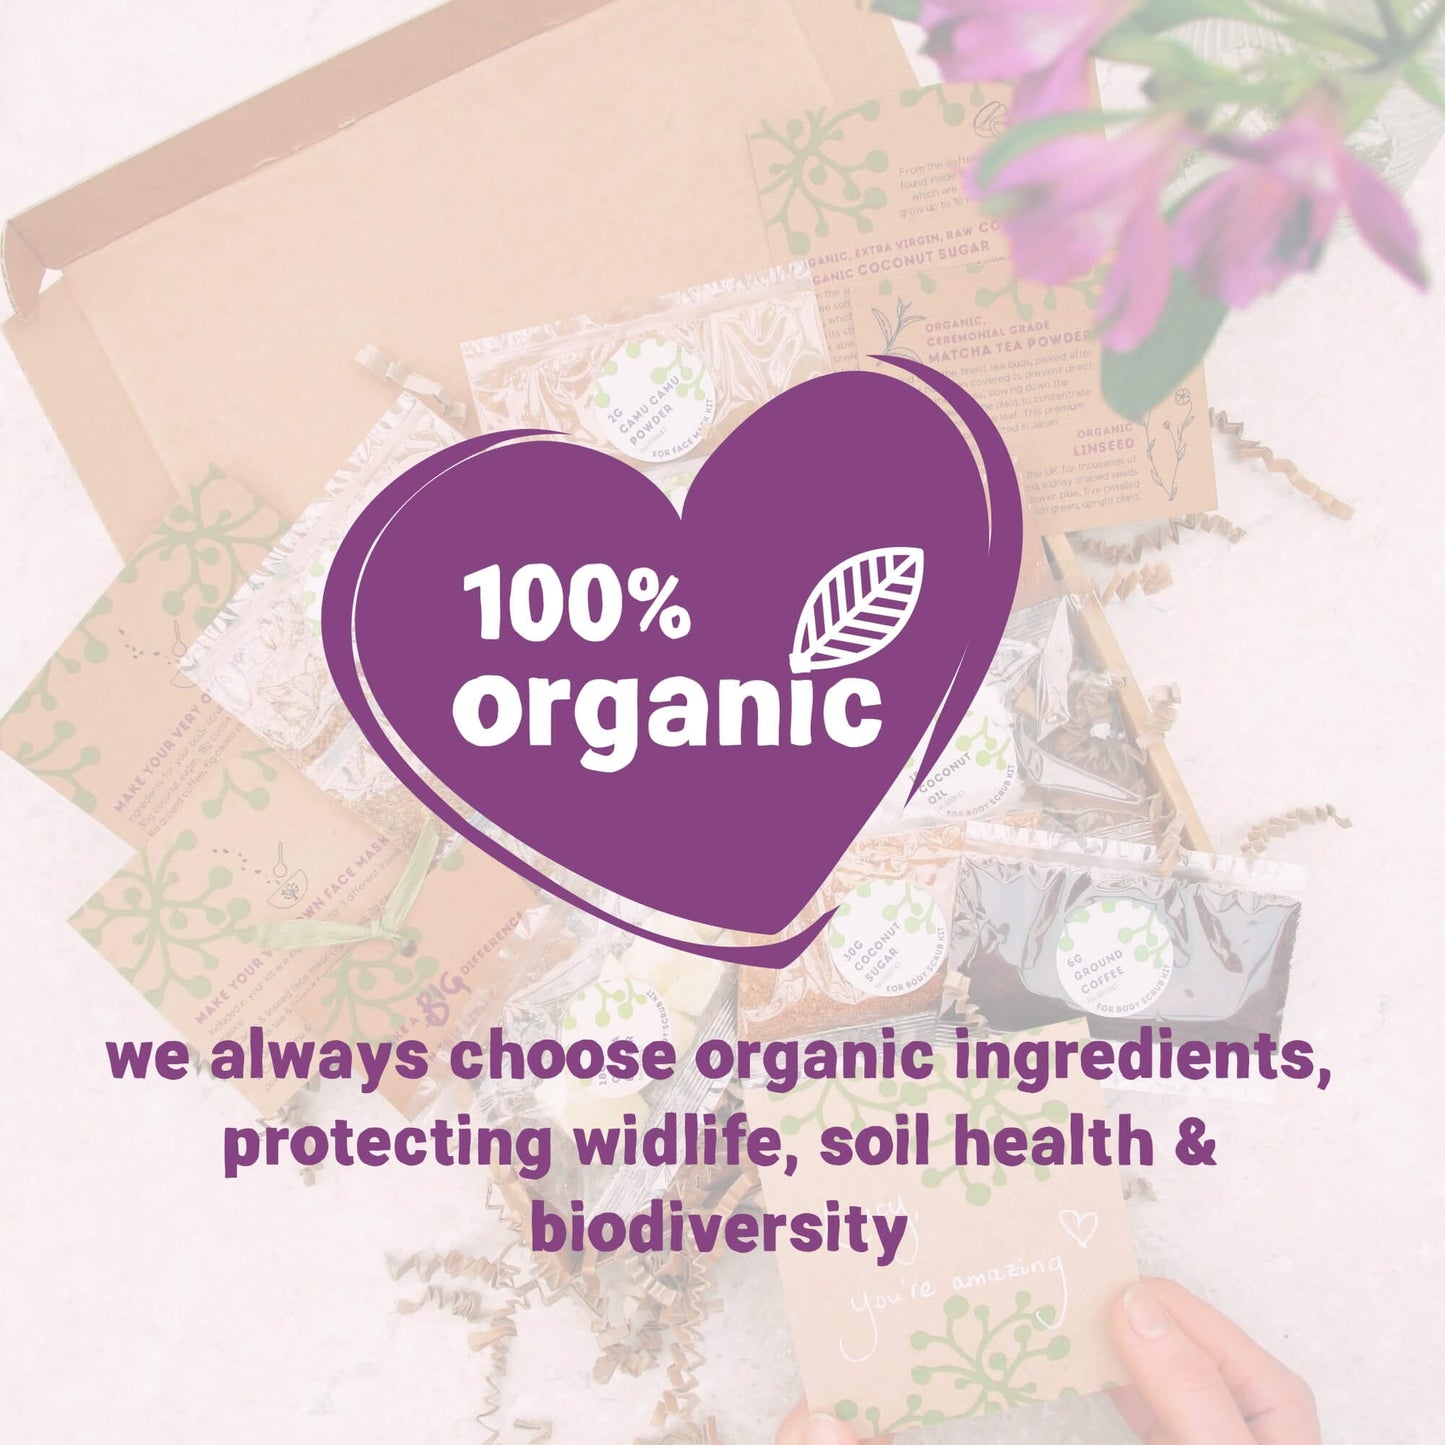 organic skincare to protect environment inside pamper letterbox gift